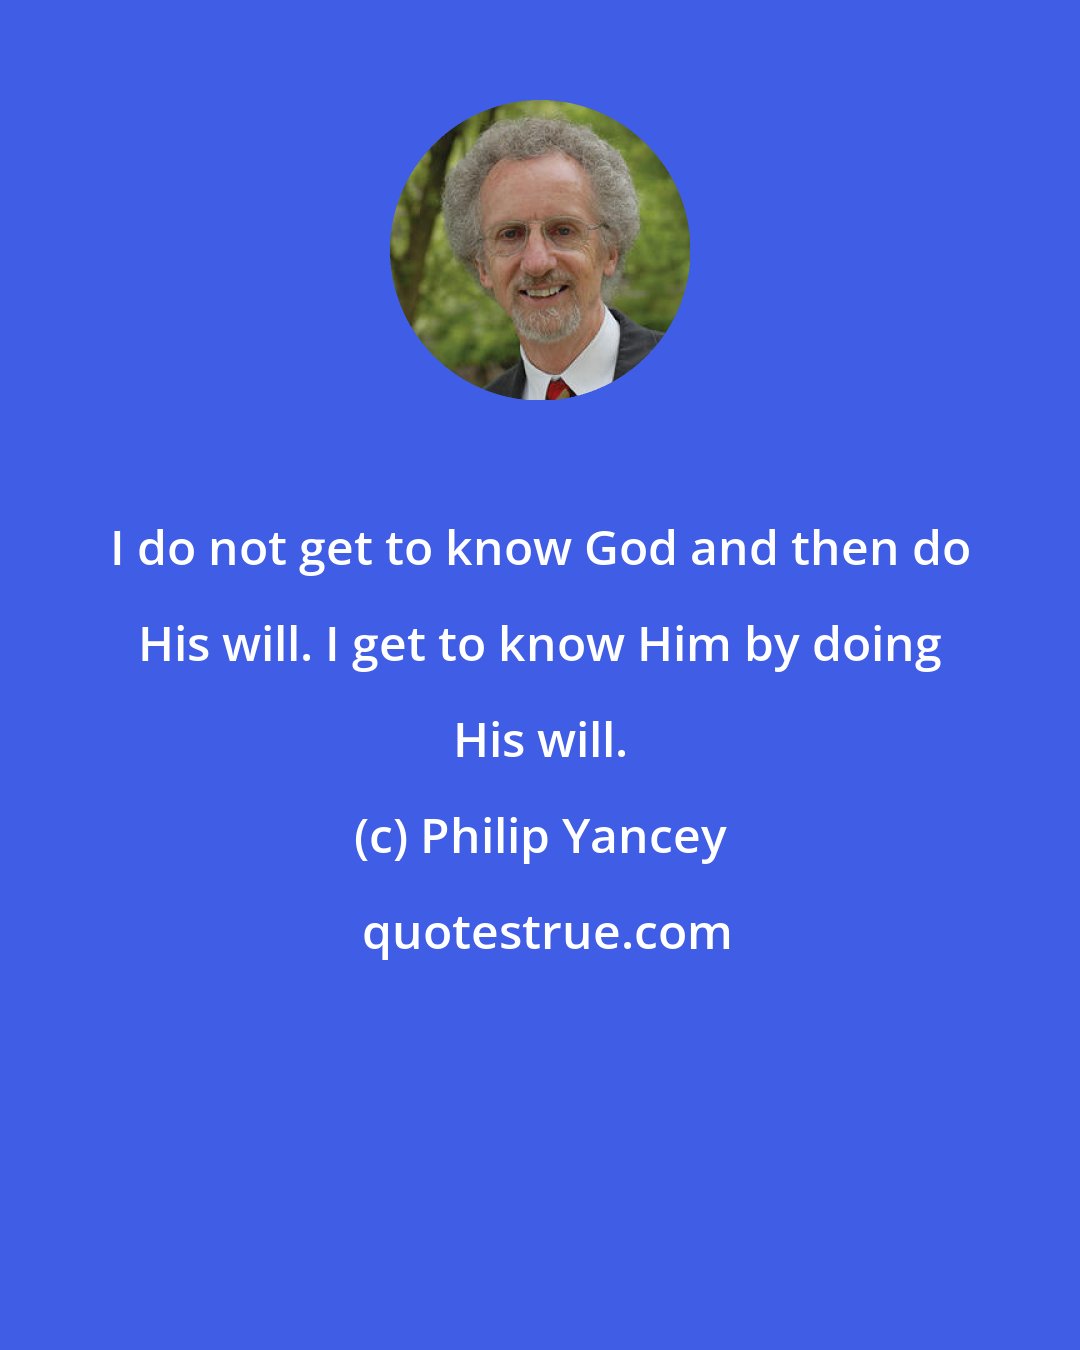 Philip Yancey: I do not get to know God and then do His will. I get to know Him by doing His will.